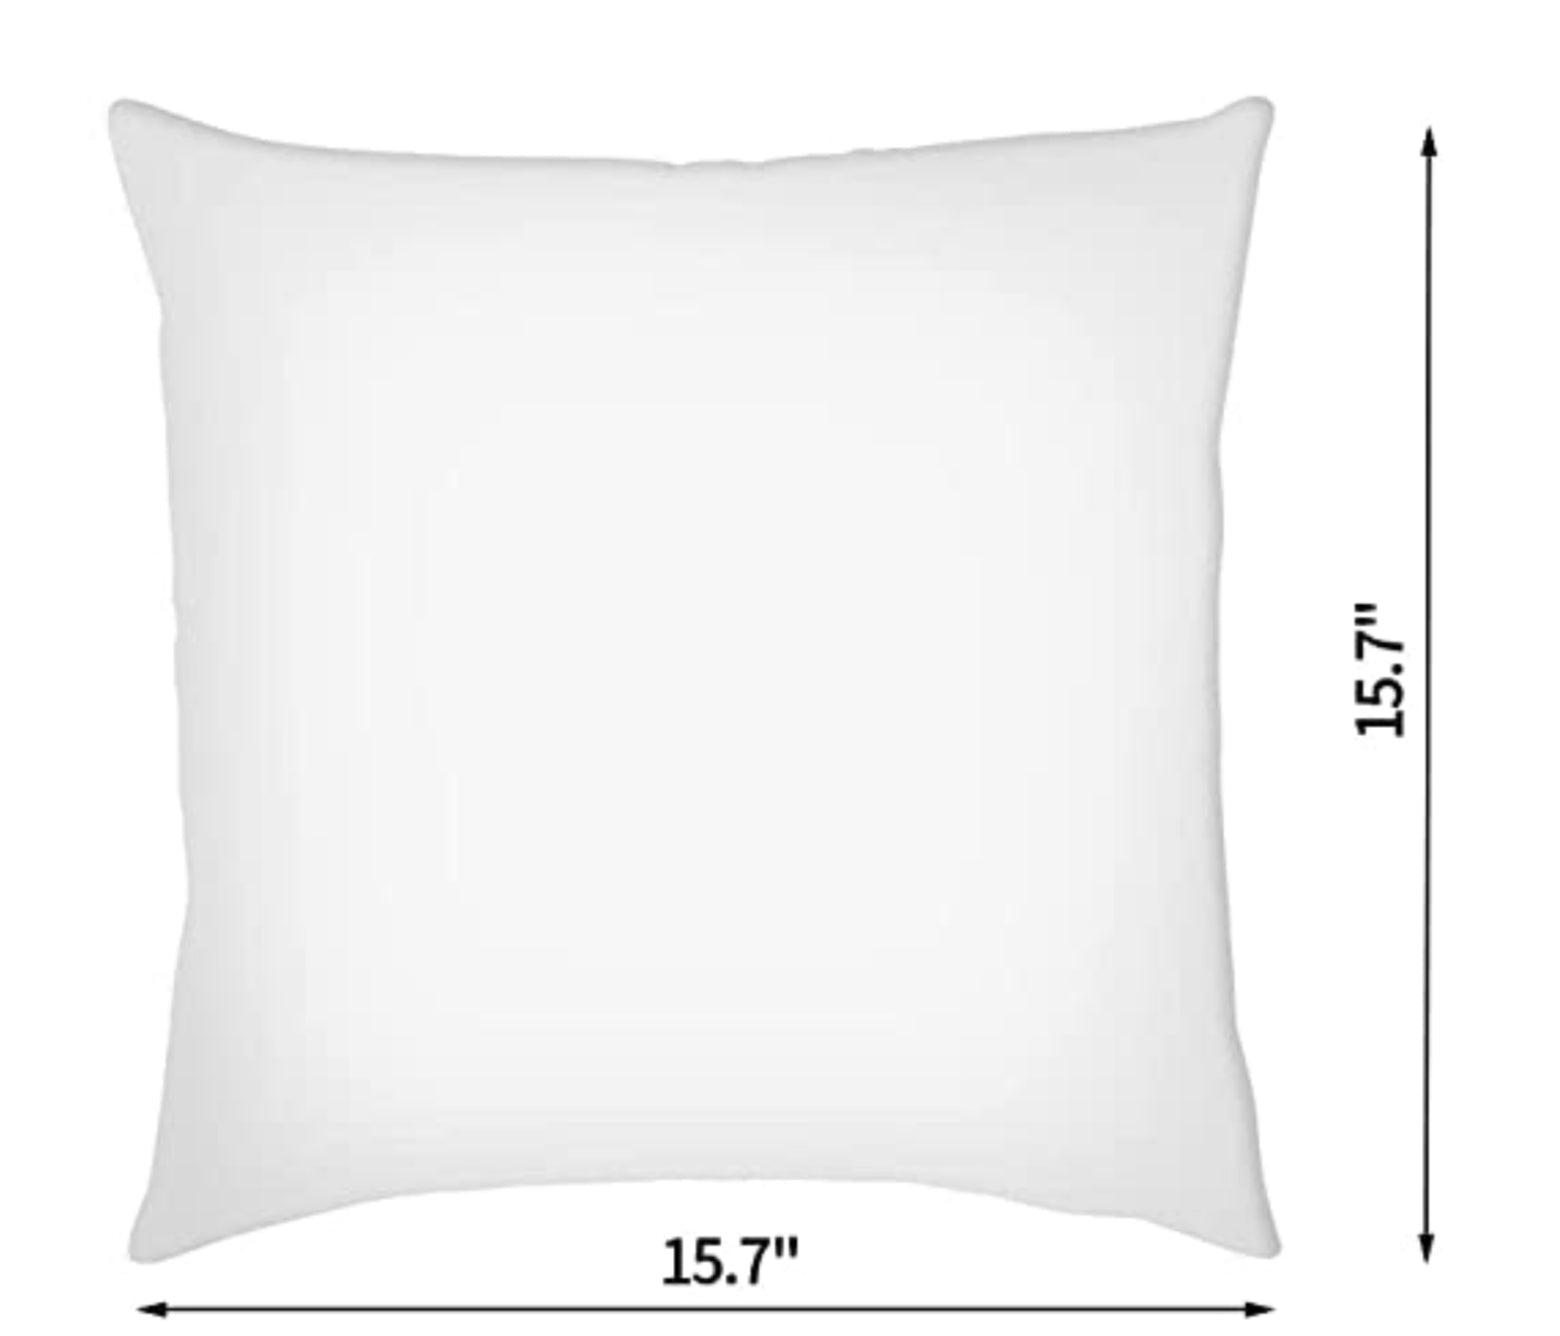 Let's Cuddle 2 - Cushion Cover